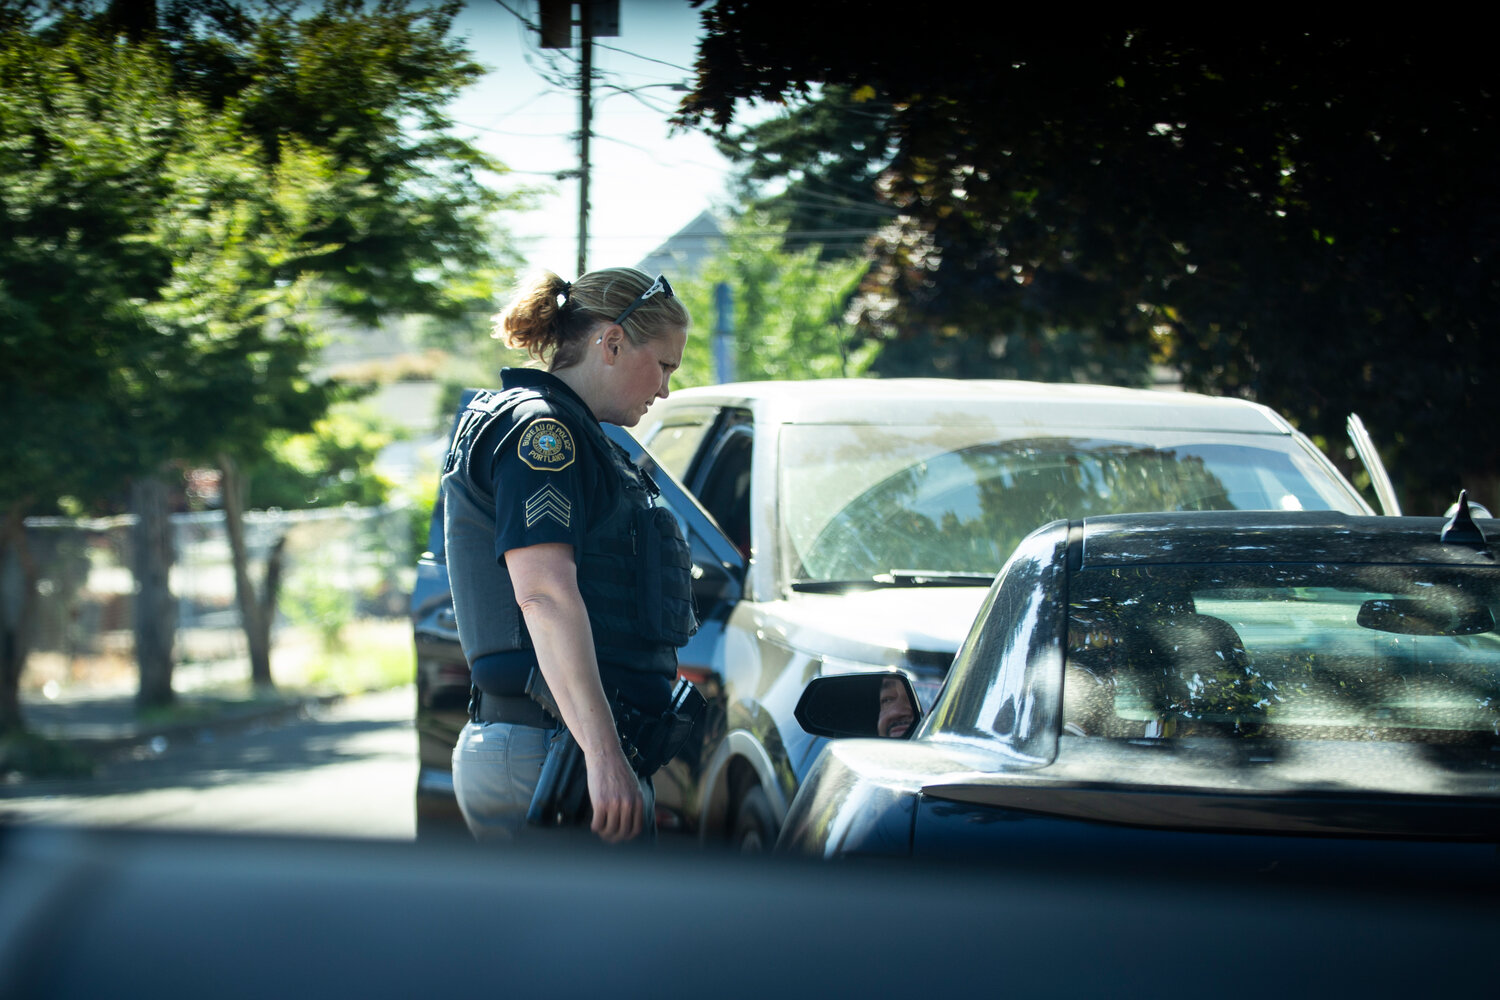 Police Sgt. Kristi Butcher, supervisor of the Portland Police Bureau’s Human Trafficking Unit, interrupts a “car date” during a directed patrol mission in Northeast Portland in July. (Moriah Ratner/InvestigateWest)